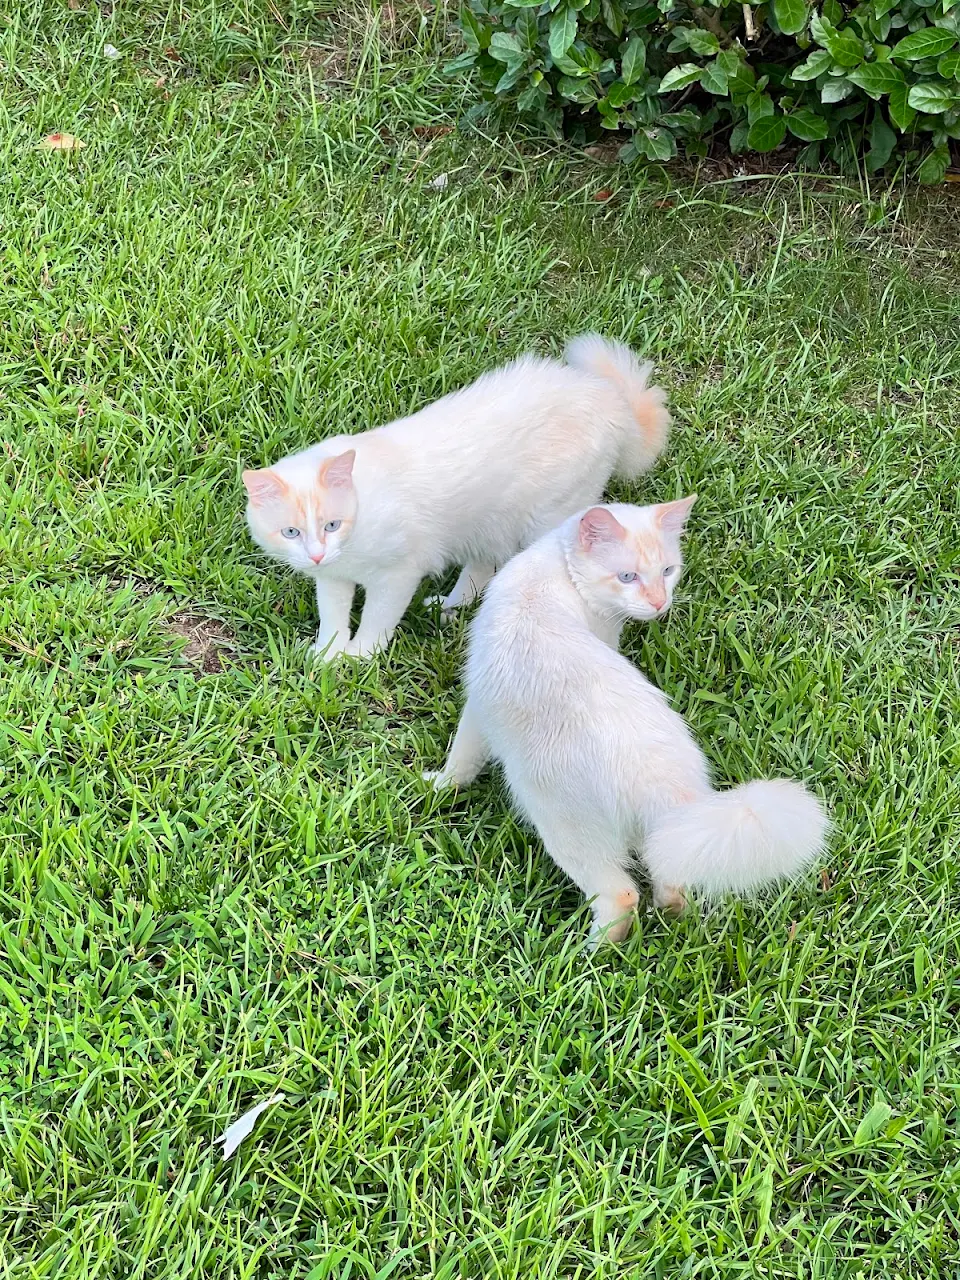 Two strays adopted me yesterday.